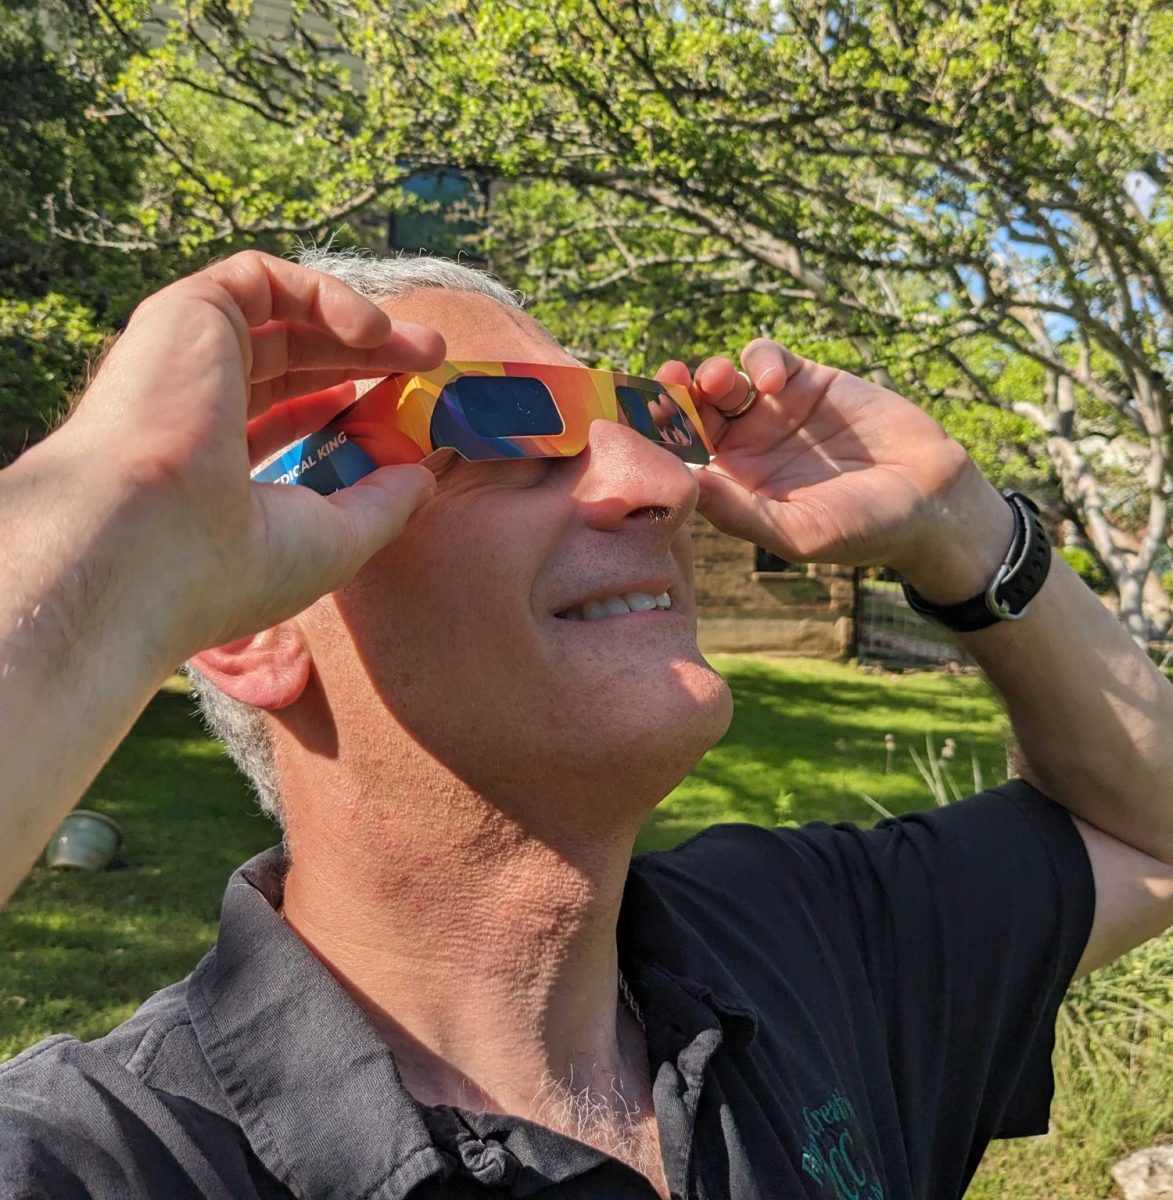 In+preparation+for+the+upcoming+total+solar+eclipse%2C+Austin+resident+Erik+Schlanger+practices+using+solar+eclipse+glasses.+Those+planning+to+observe+the+total+eclipse+have+been+encouraged+to+use+these+special+shaded+lenses+to+protect+their+eyesight+from+the+suns+harsh+rays.